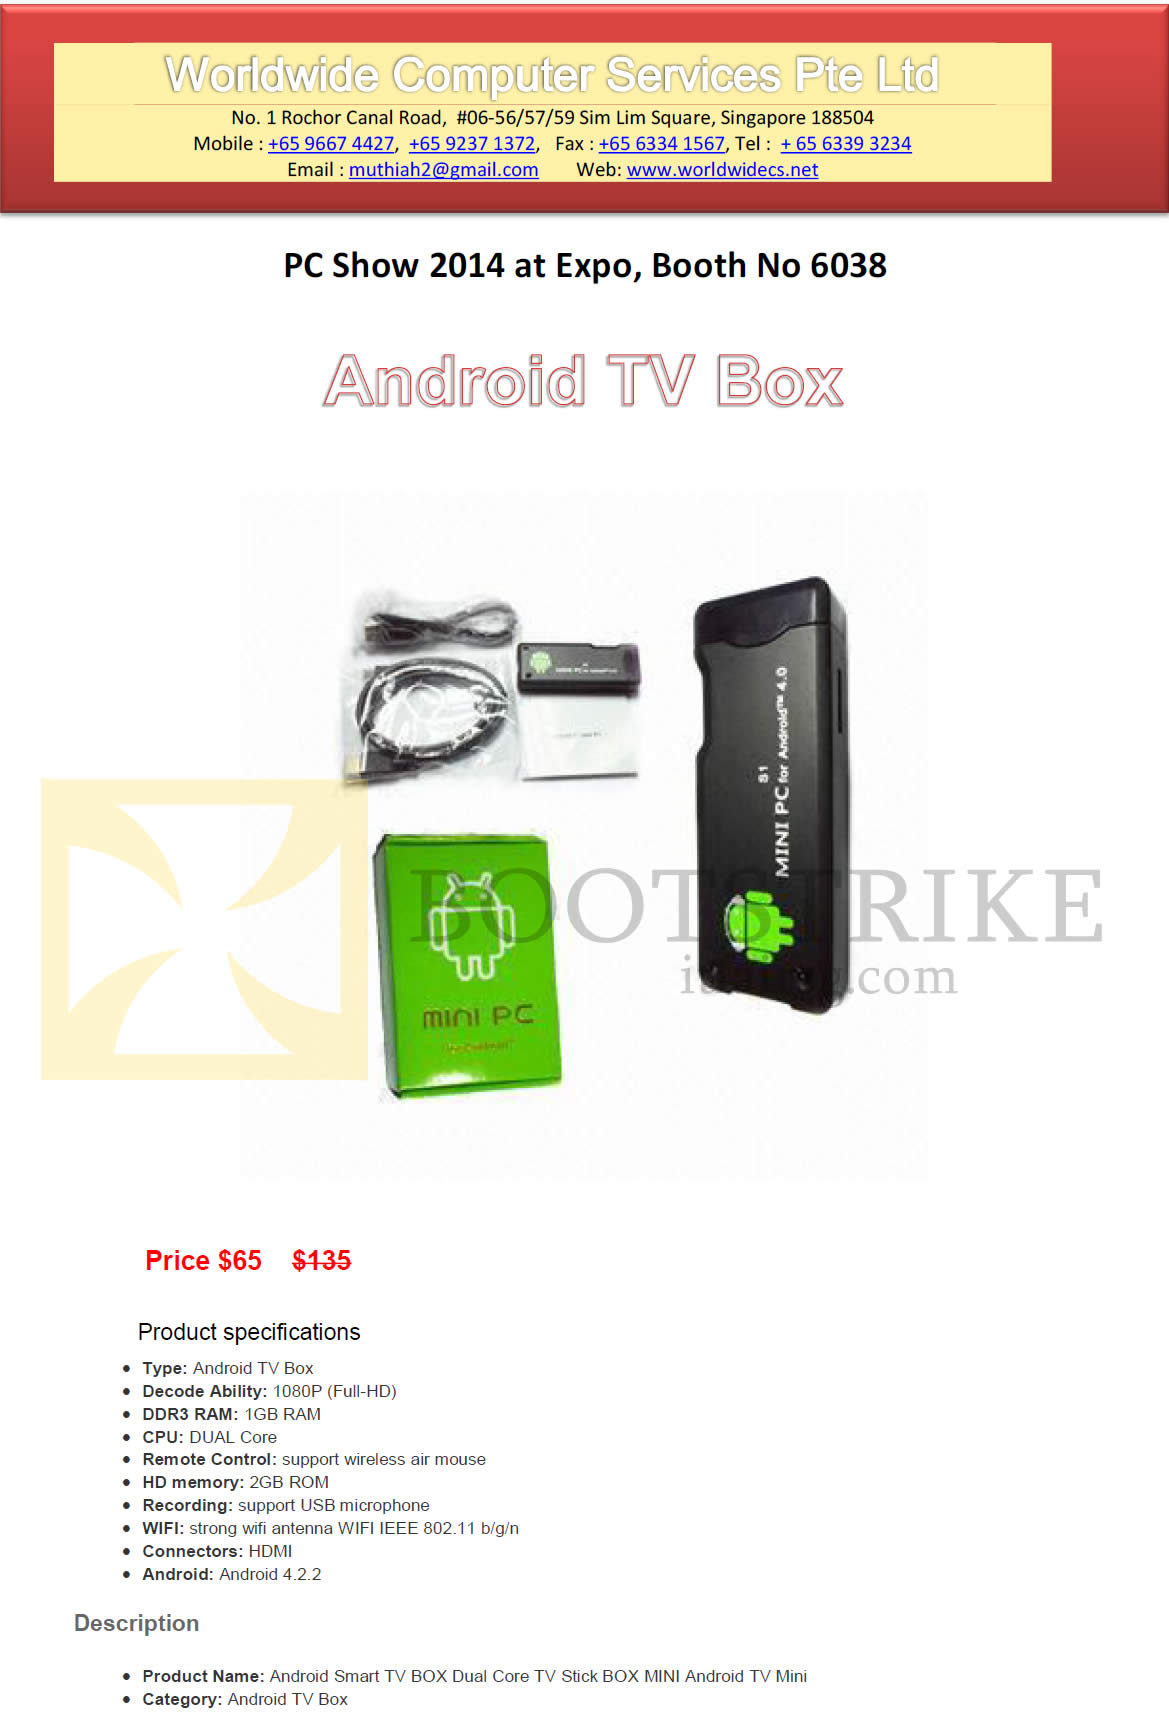 PC SHOW 2014 price list image brochure of Worldwide Computer Services Android TV Box